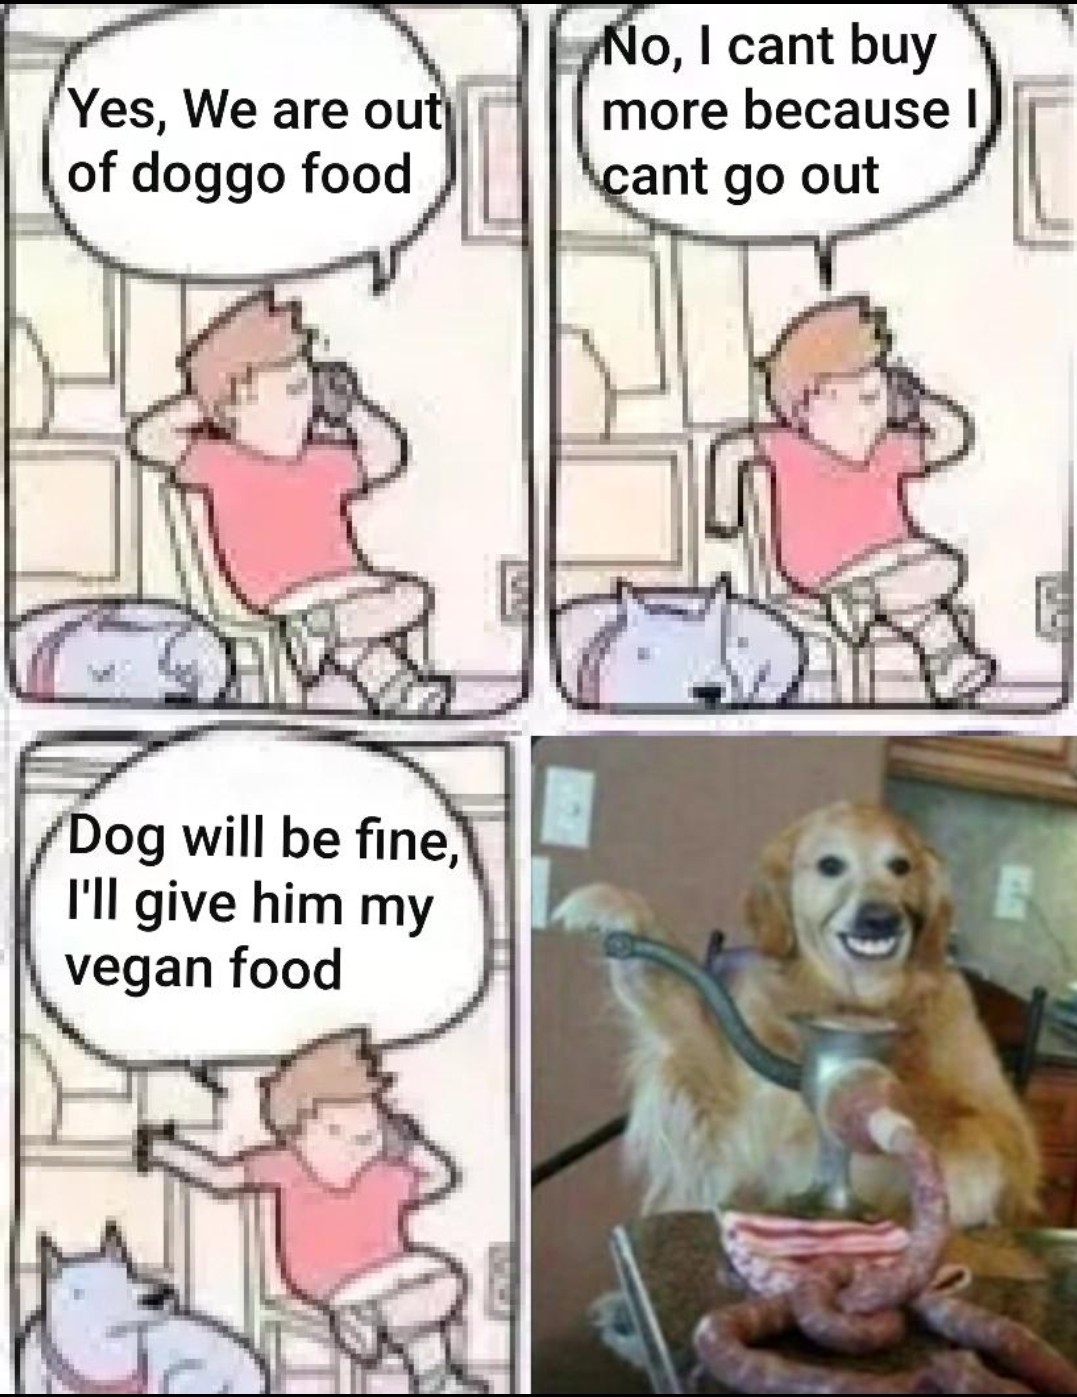 The dogs face tho - meme